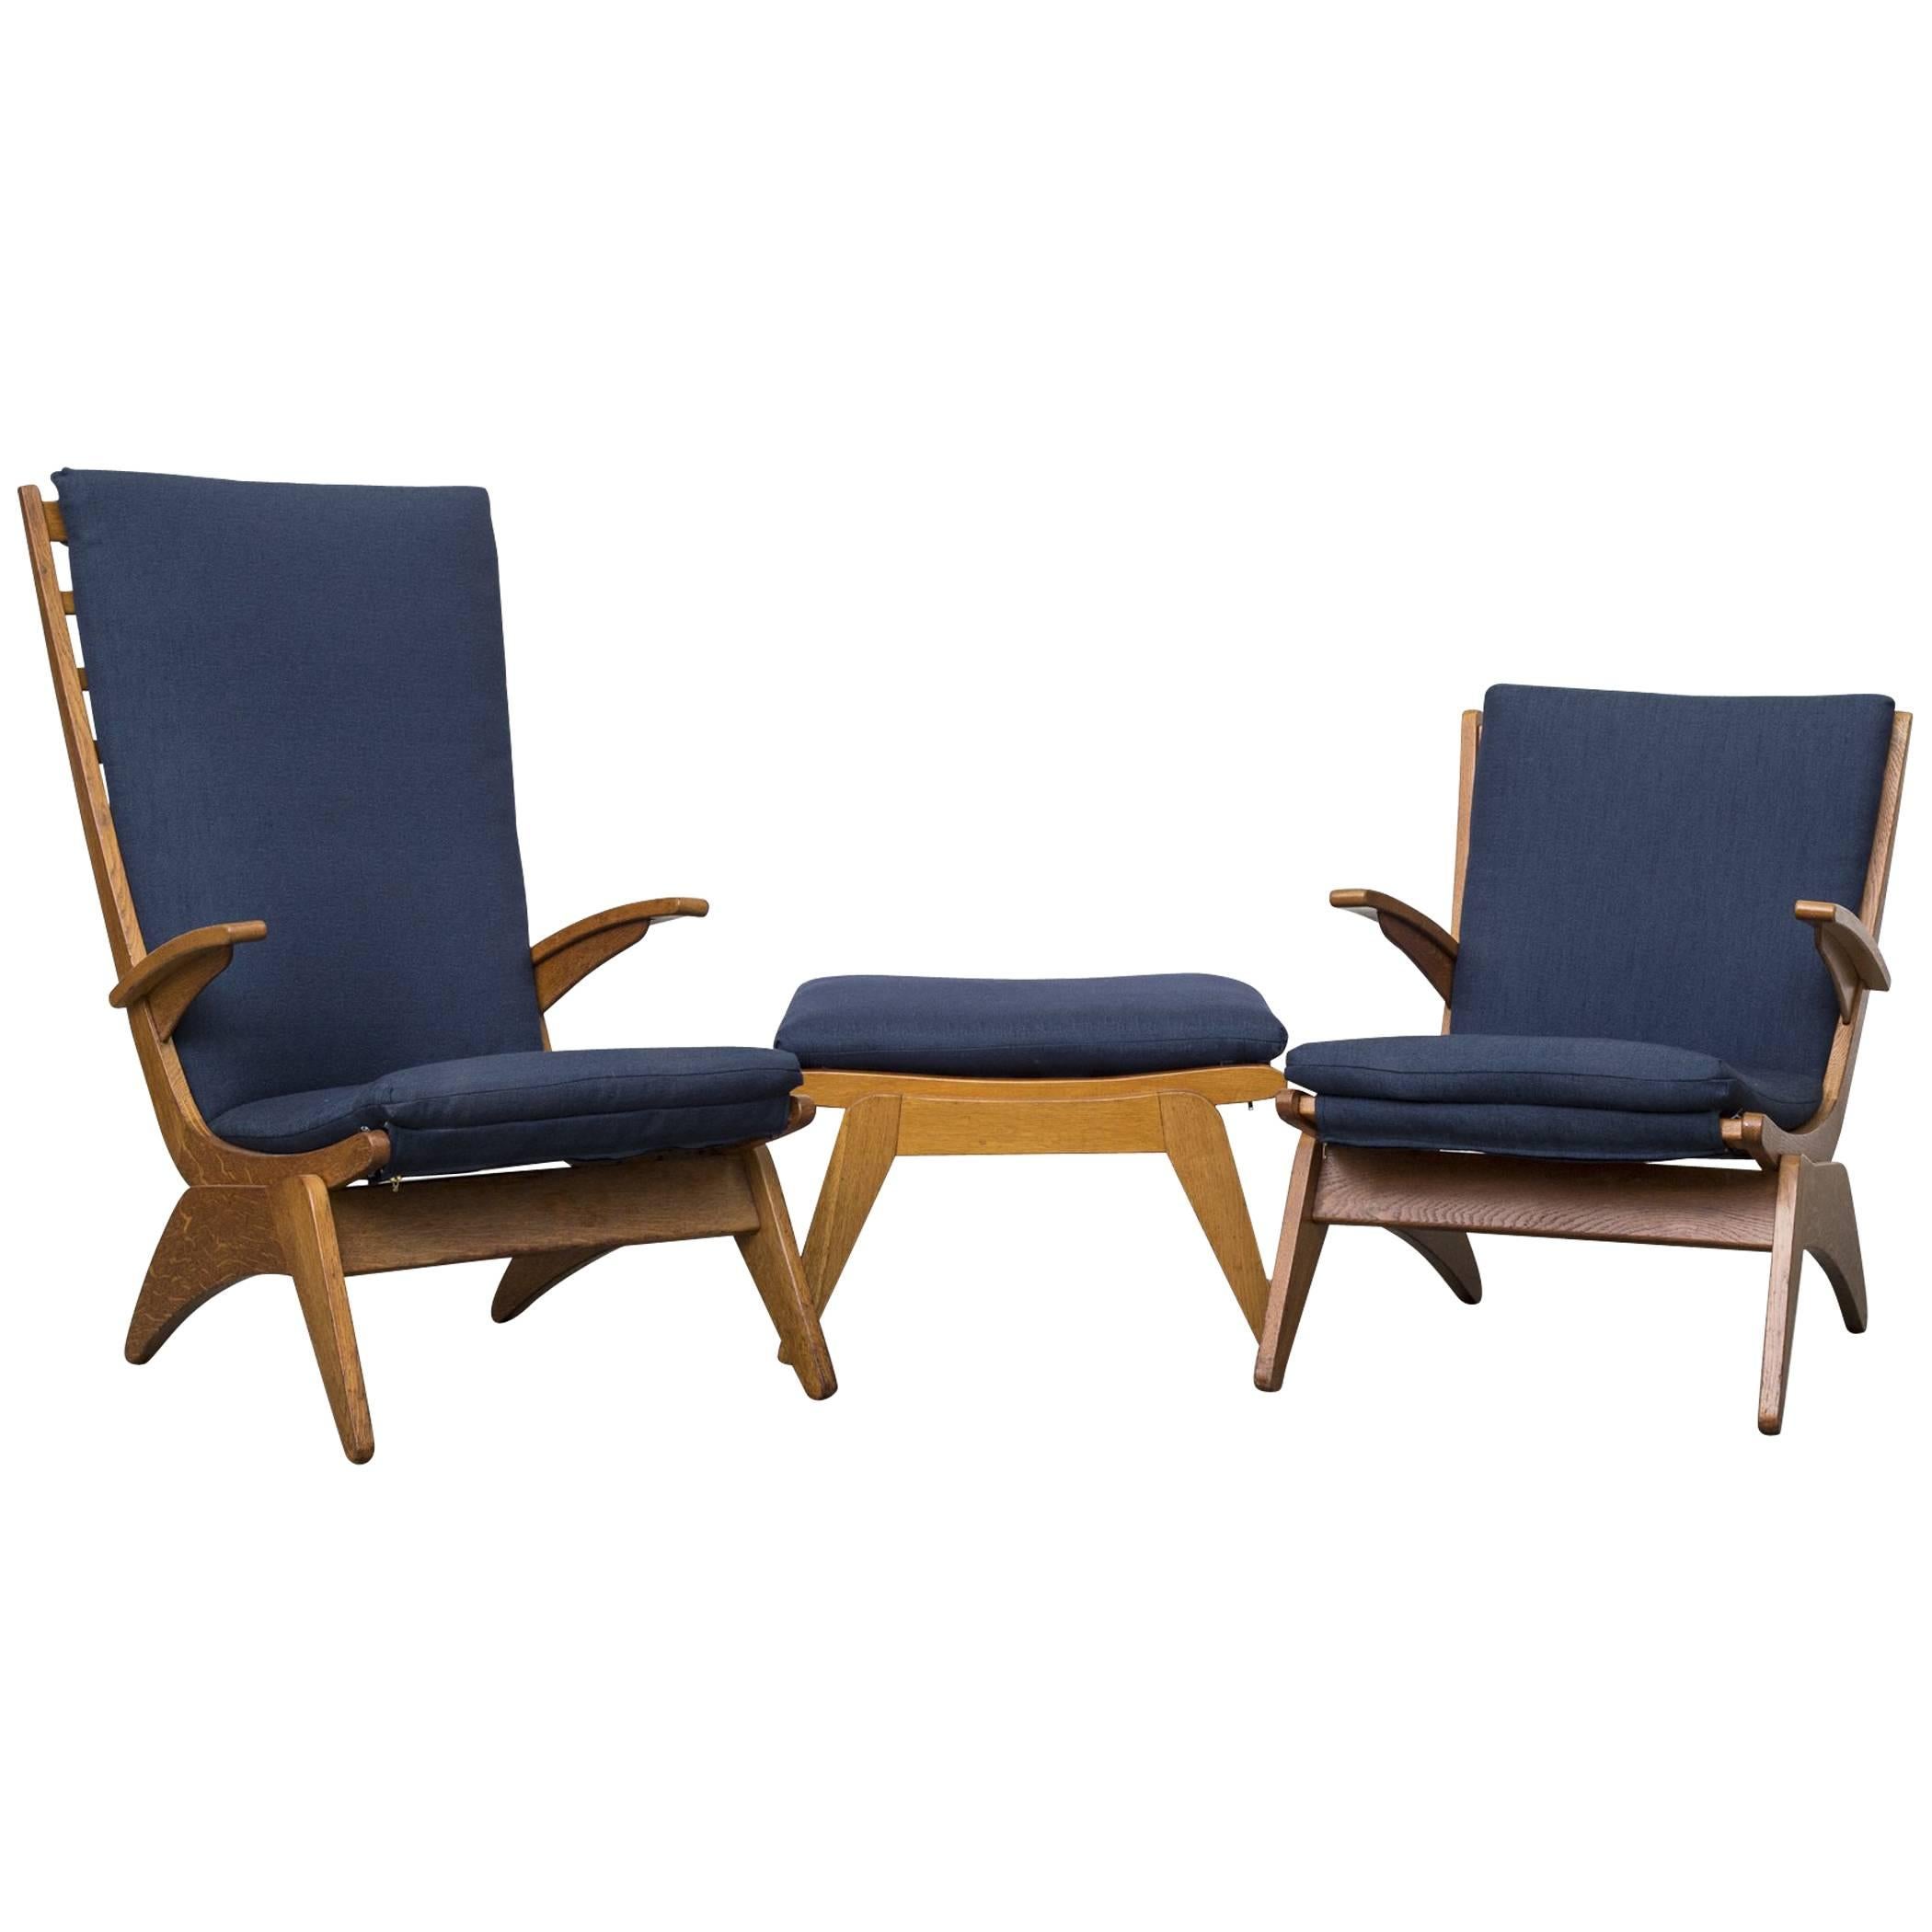 Jan Den Drijver Birch Slat Back His and Hers Lounge Set with Ottoman